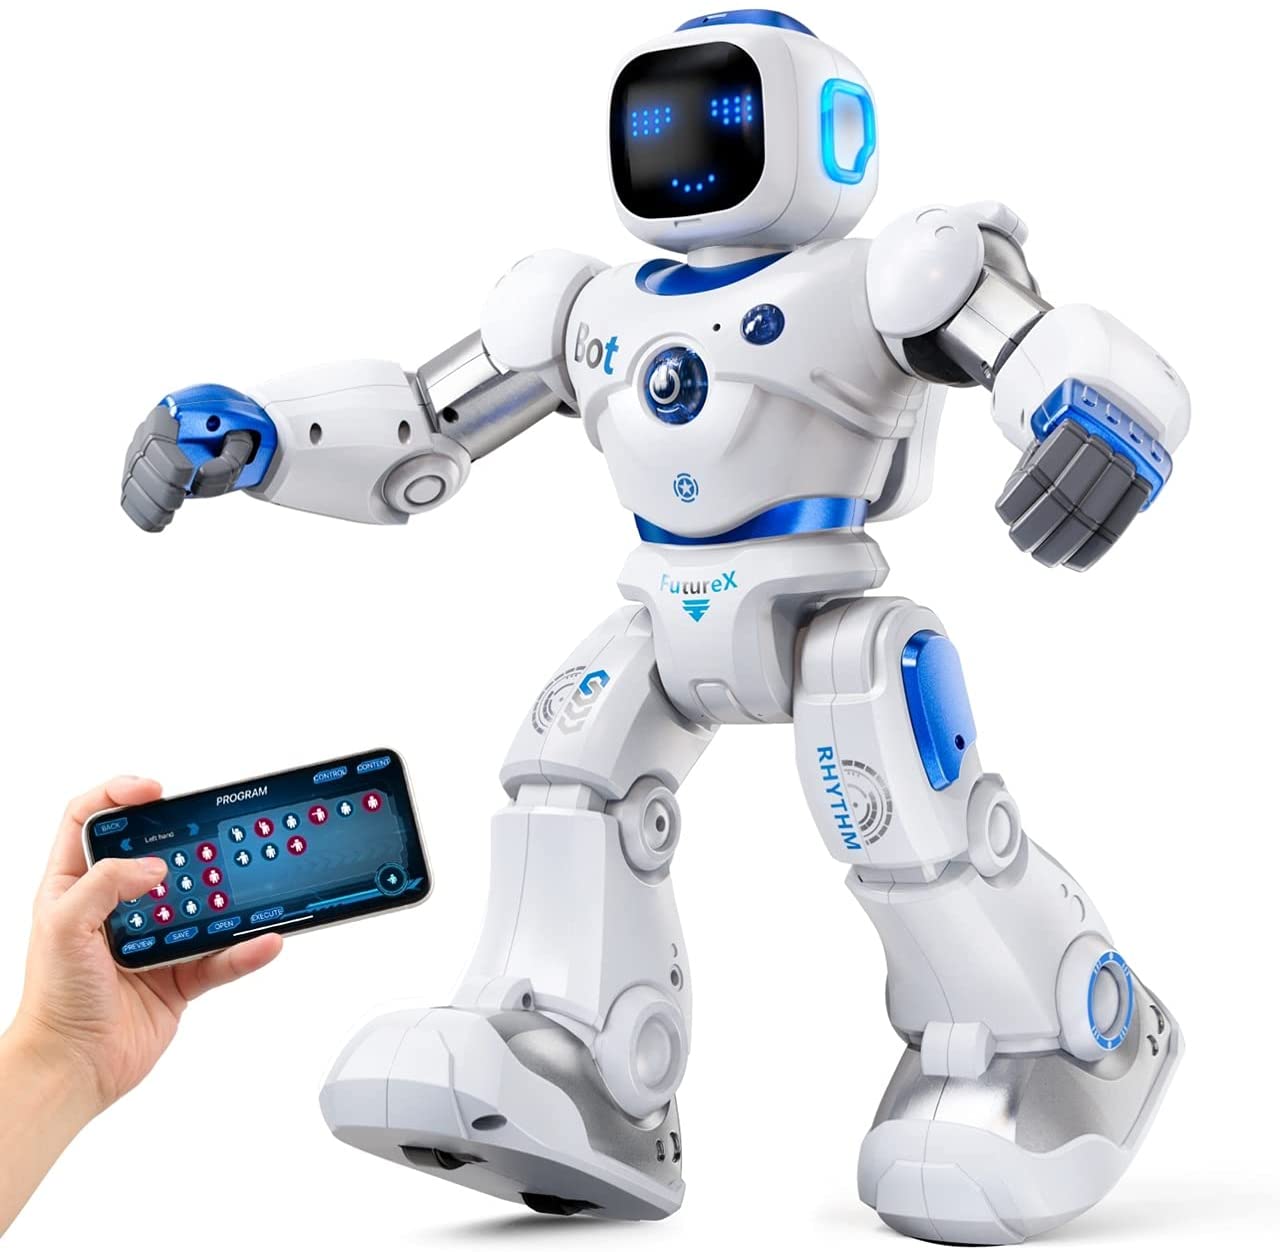 Ruko Smart Robots for Kids, Large Programmable Interactive RC Robot with Voice Control